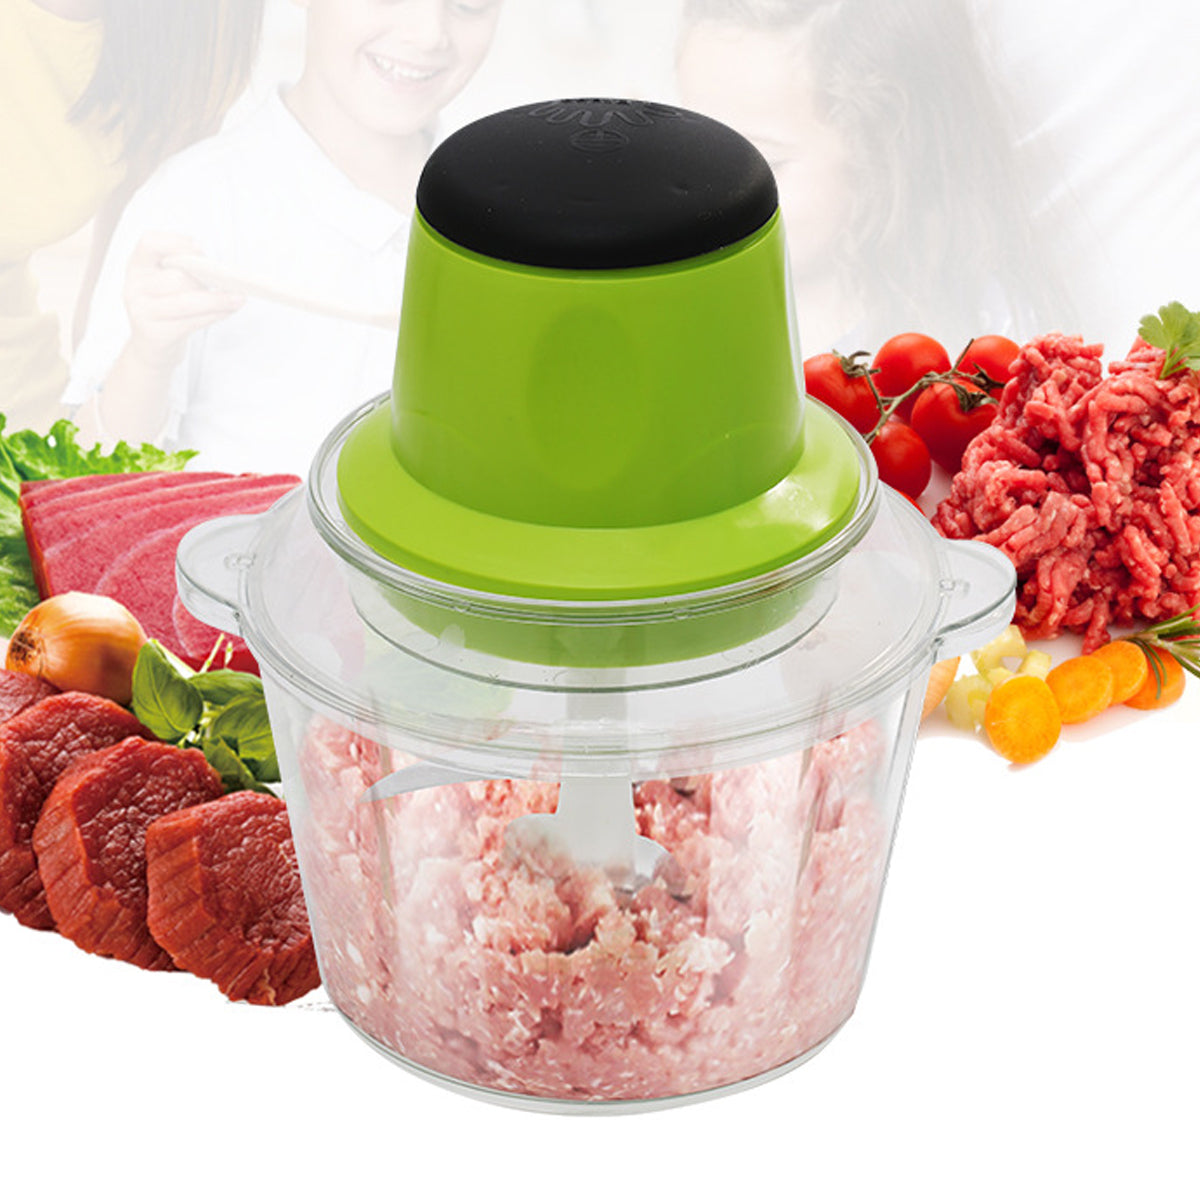 New Best Multi Functional Meat Grinder Universal Food King cooking Good Family Reason